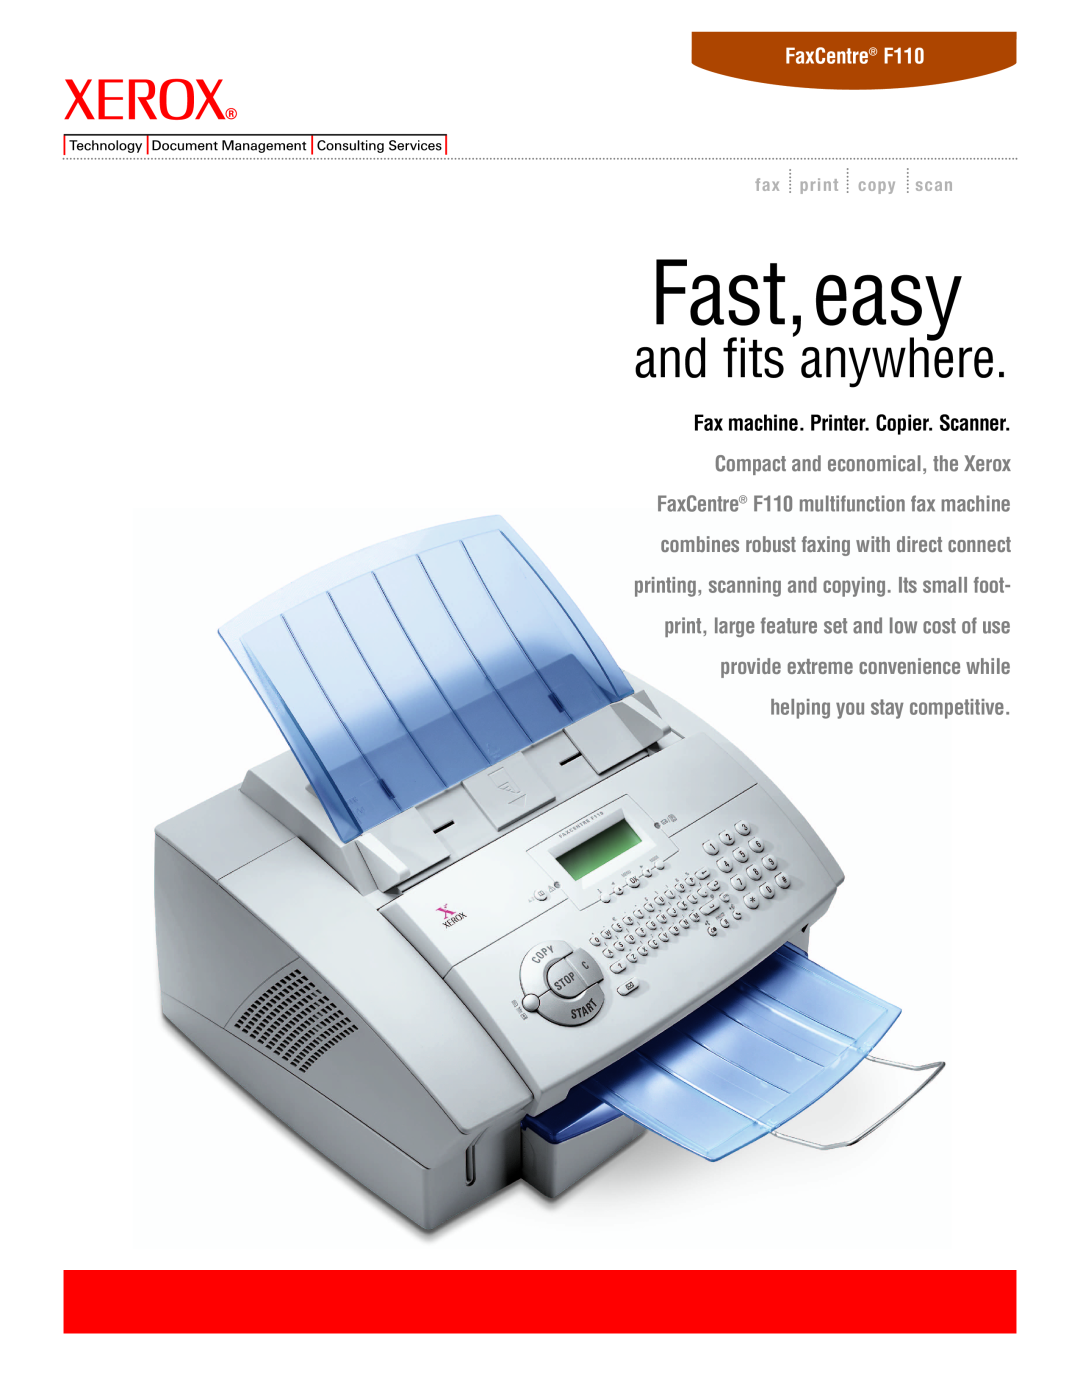 Xerox manual FaxCentre F110, Fast,easy, and fits anywhere, fax print copy scan 